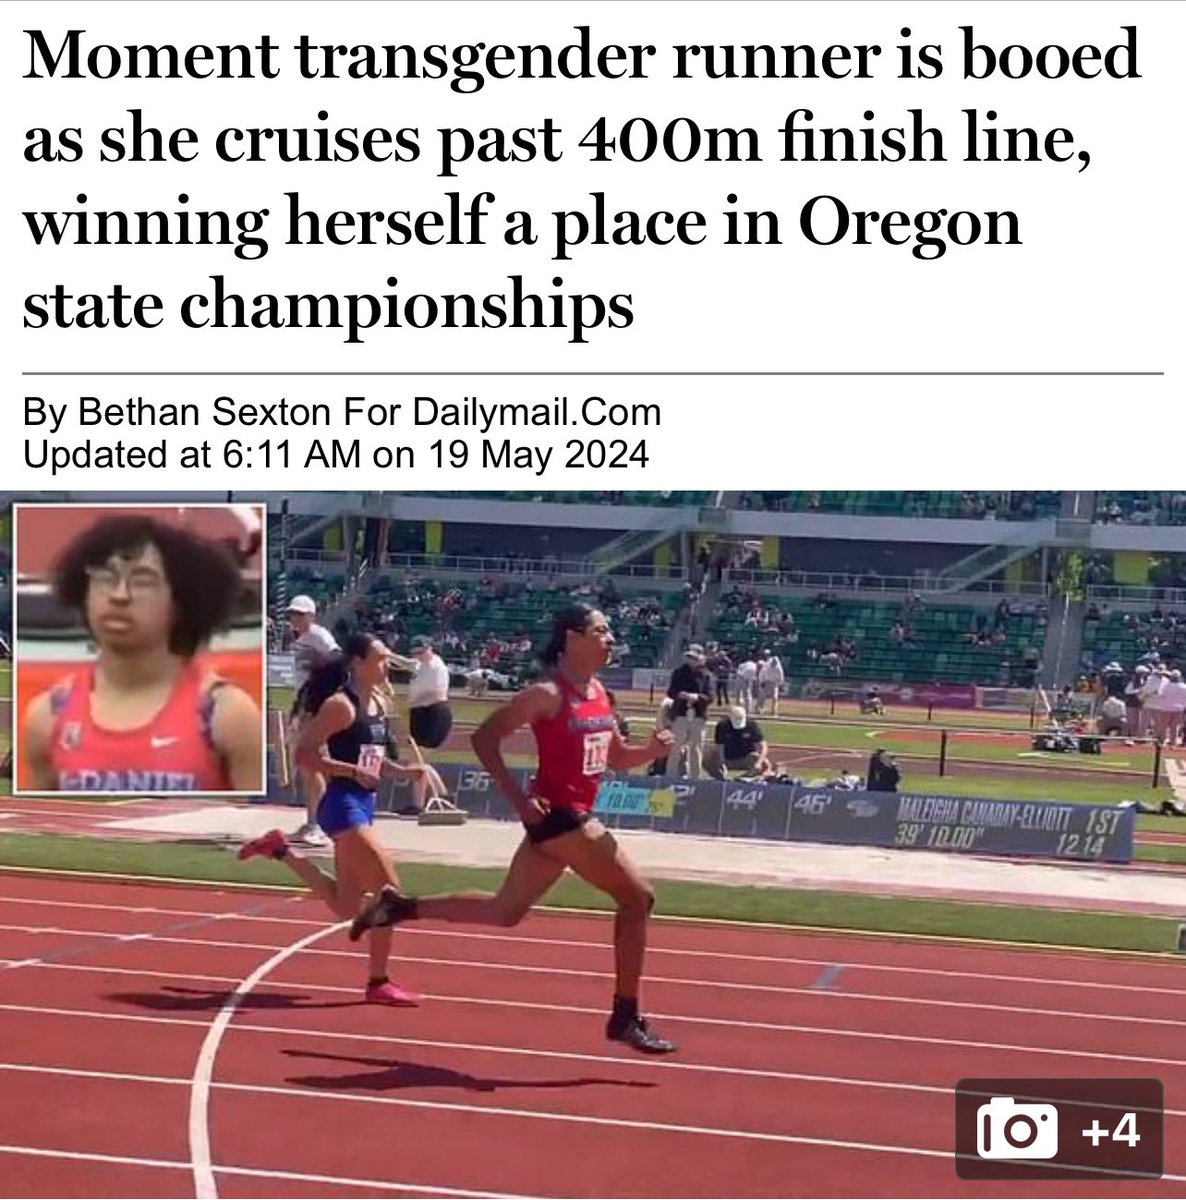 Moment male runner is booed as he cruises past 400m finish line, stealing himself a place in Oregon state championships female race, hence the boos.